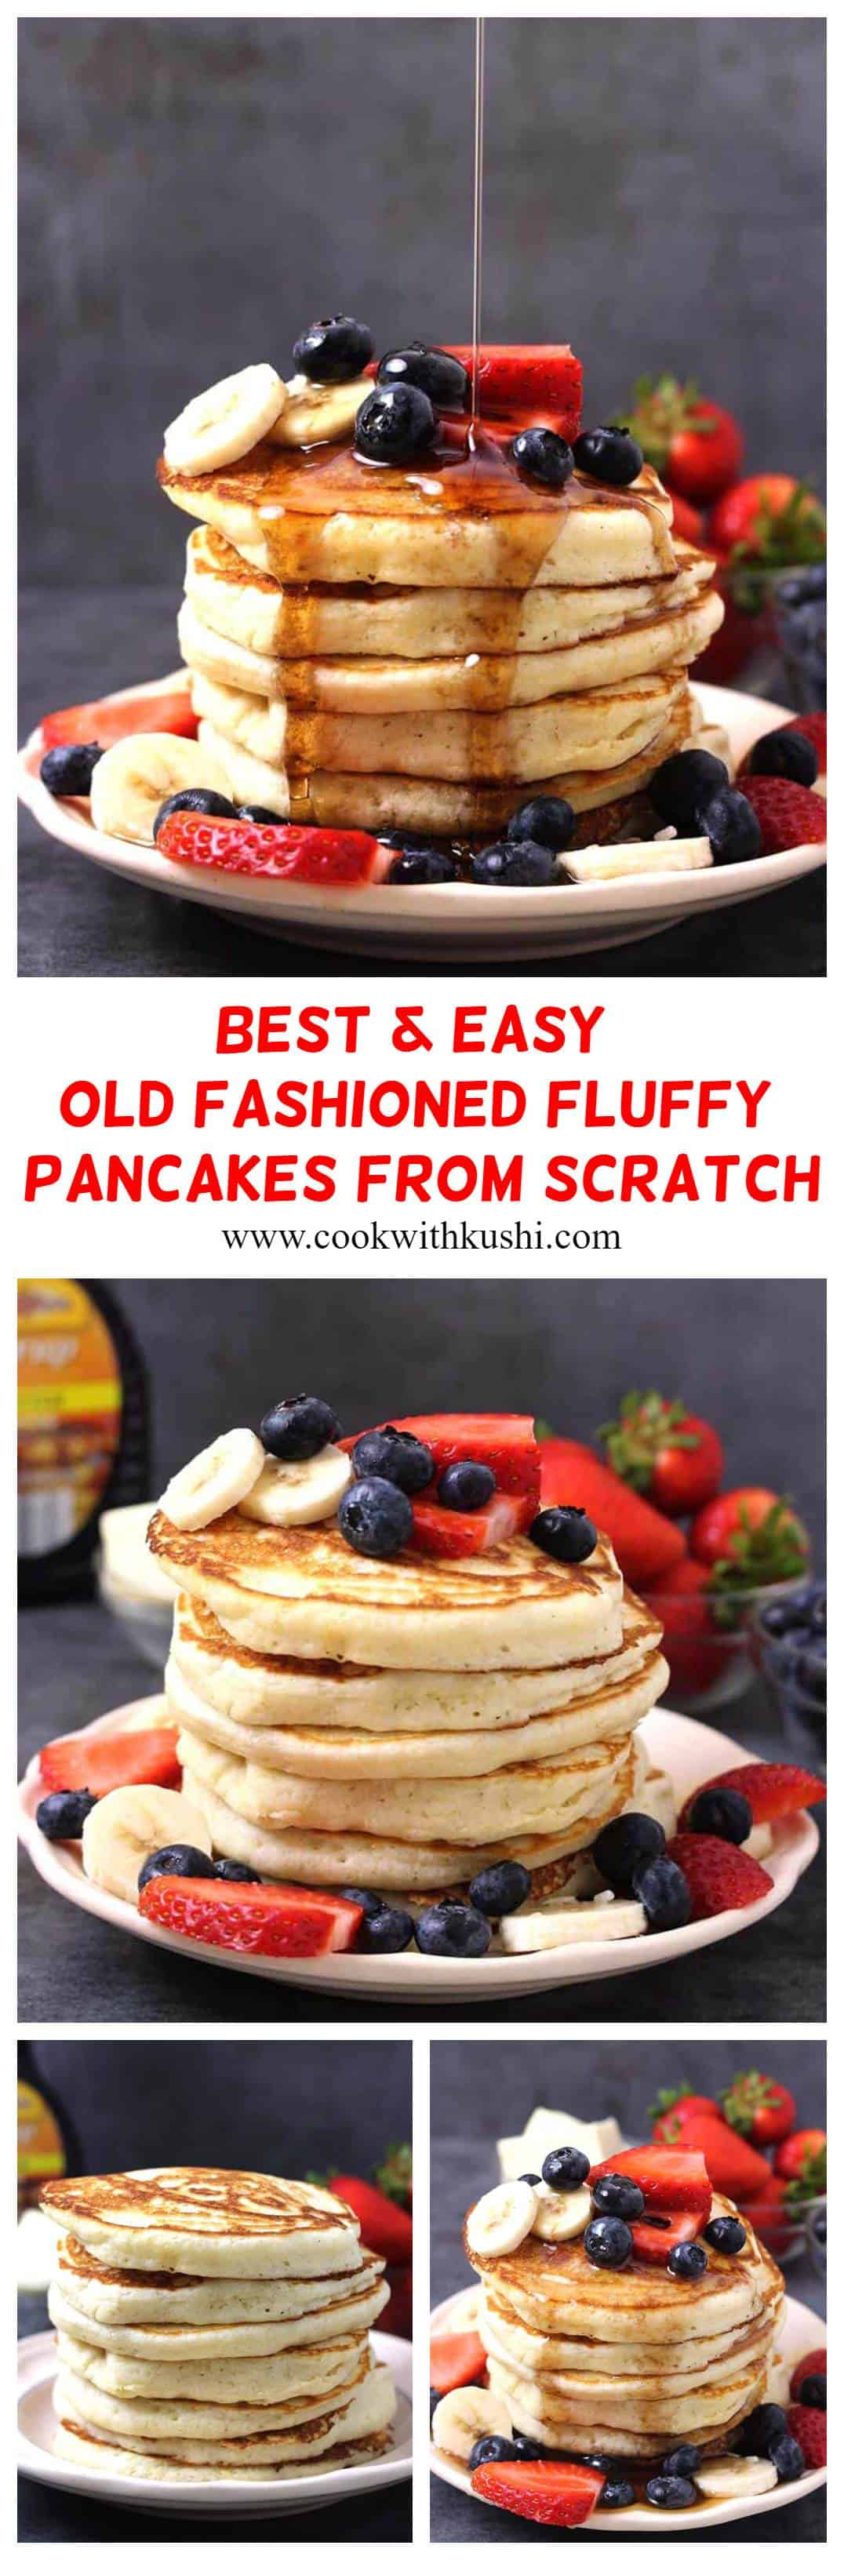 These Old Fashioned Homemade Pancakes are perfectly soft, best and fluffy. You will not only love this simple and easy pancake recipe but also make it frequent item in your kitchen for breakfast. #pancakes #pancake #healthypancakes #bestpancakes #fluffypancakes #breakfastrecipes #holidaybreakfast #easterbrunch #maplesyrup #sourdough #waffle #crepes #strawberries #blueberries #banana #easyrecipes #americanpancakes #pancakemix #oldfashioned #keto #vegan #eggless #buttermilk #homemade #flatcake #christmasbreakfast